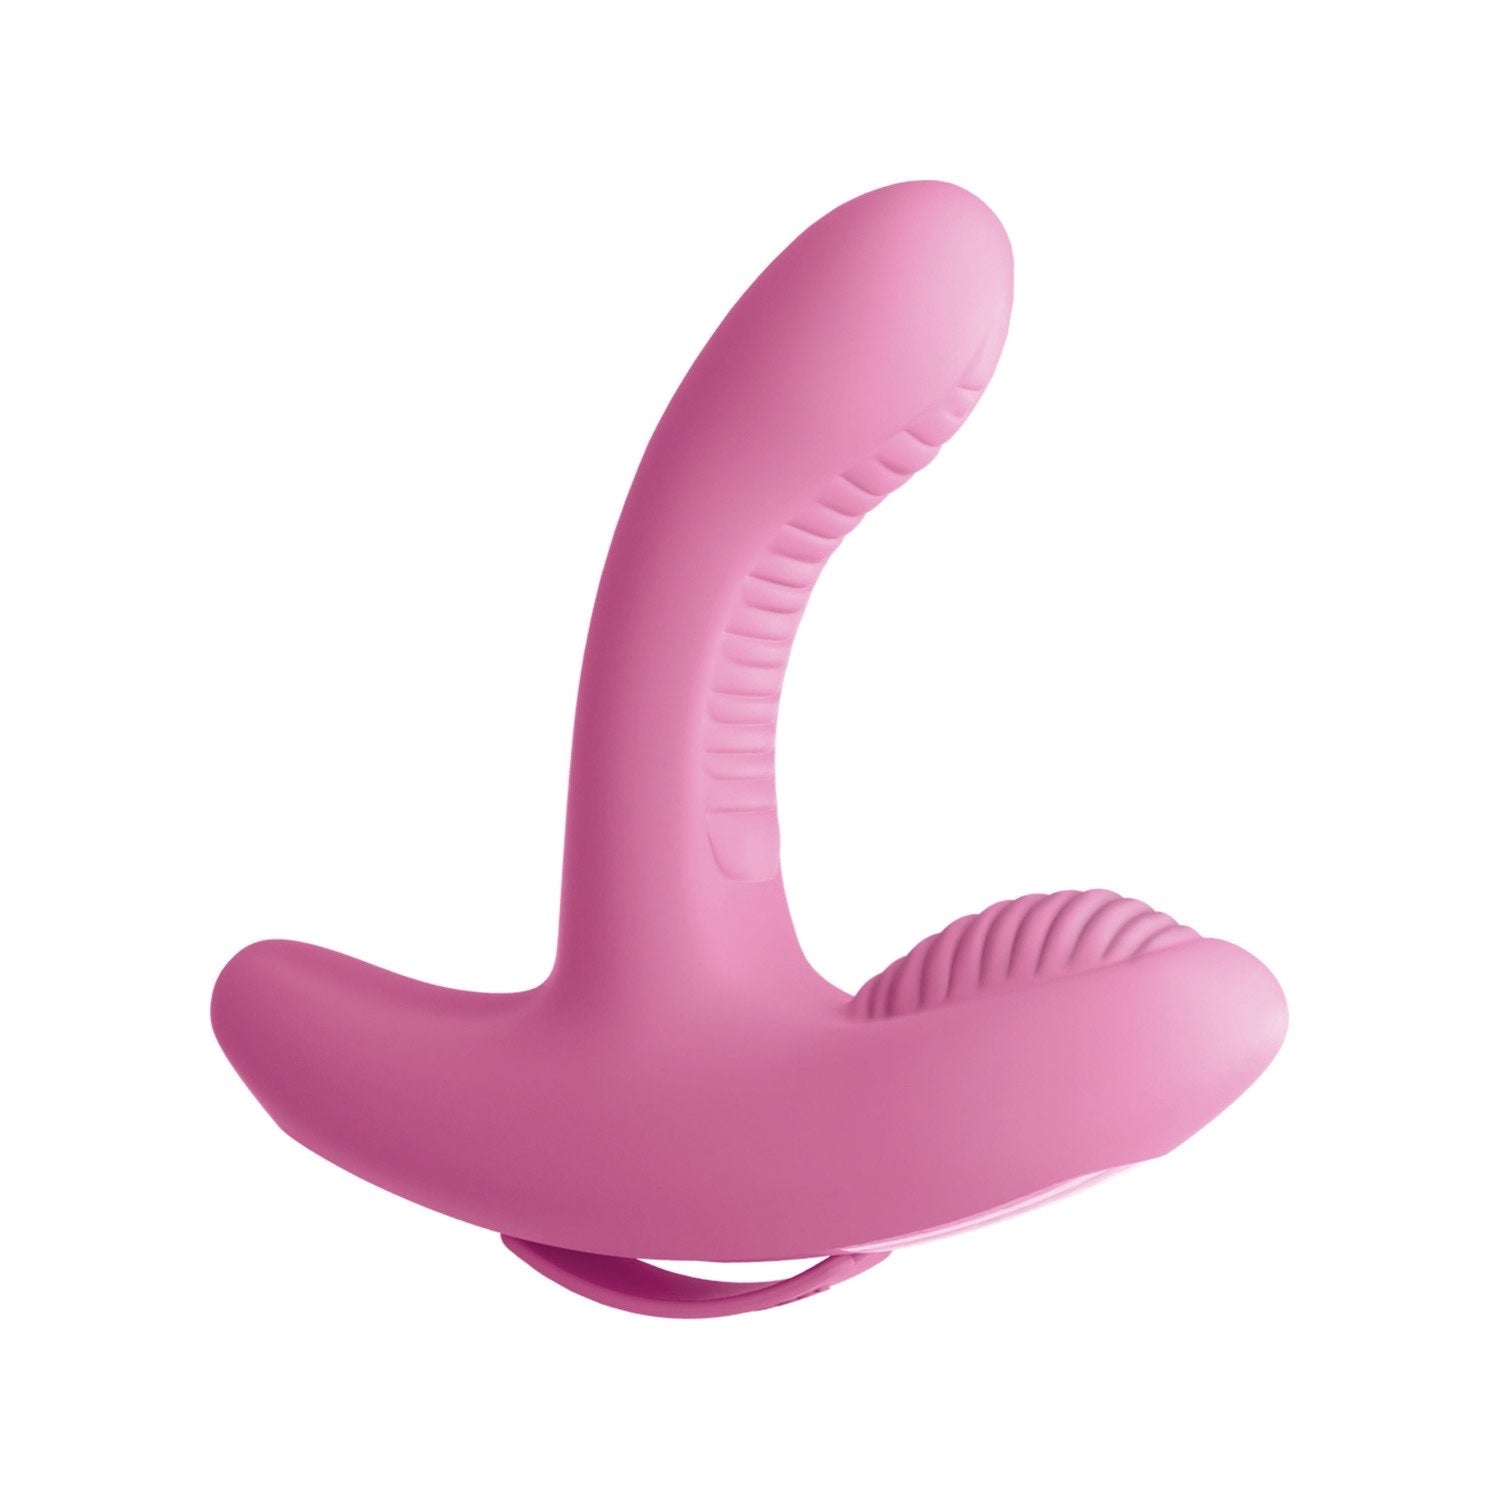 3Some Rock N Grind - Pink USB Rechargeable Stimulator with Wireless Remote by Pipedream